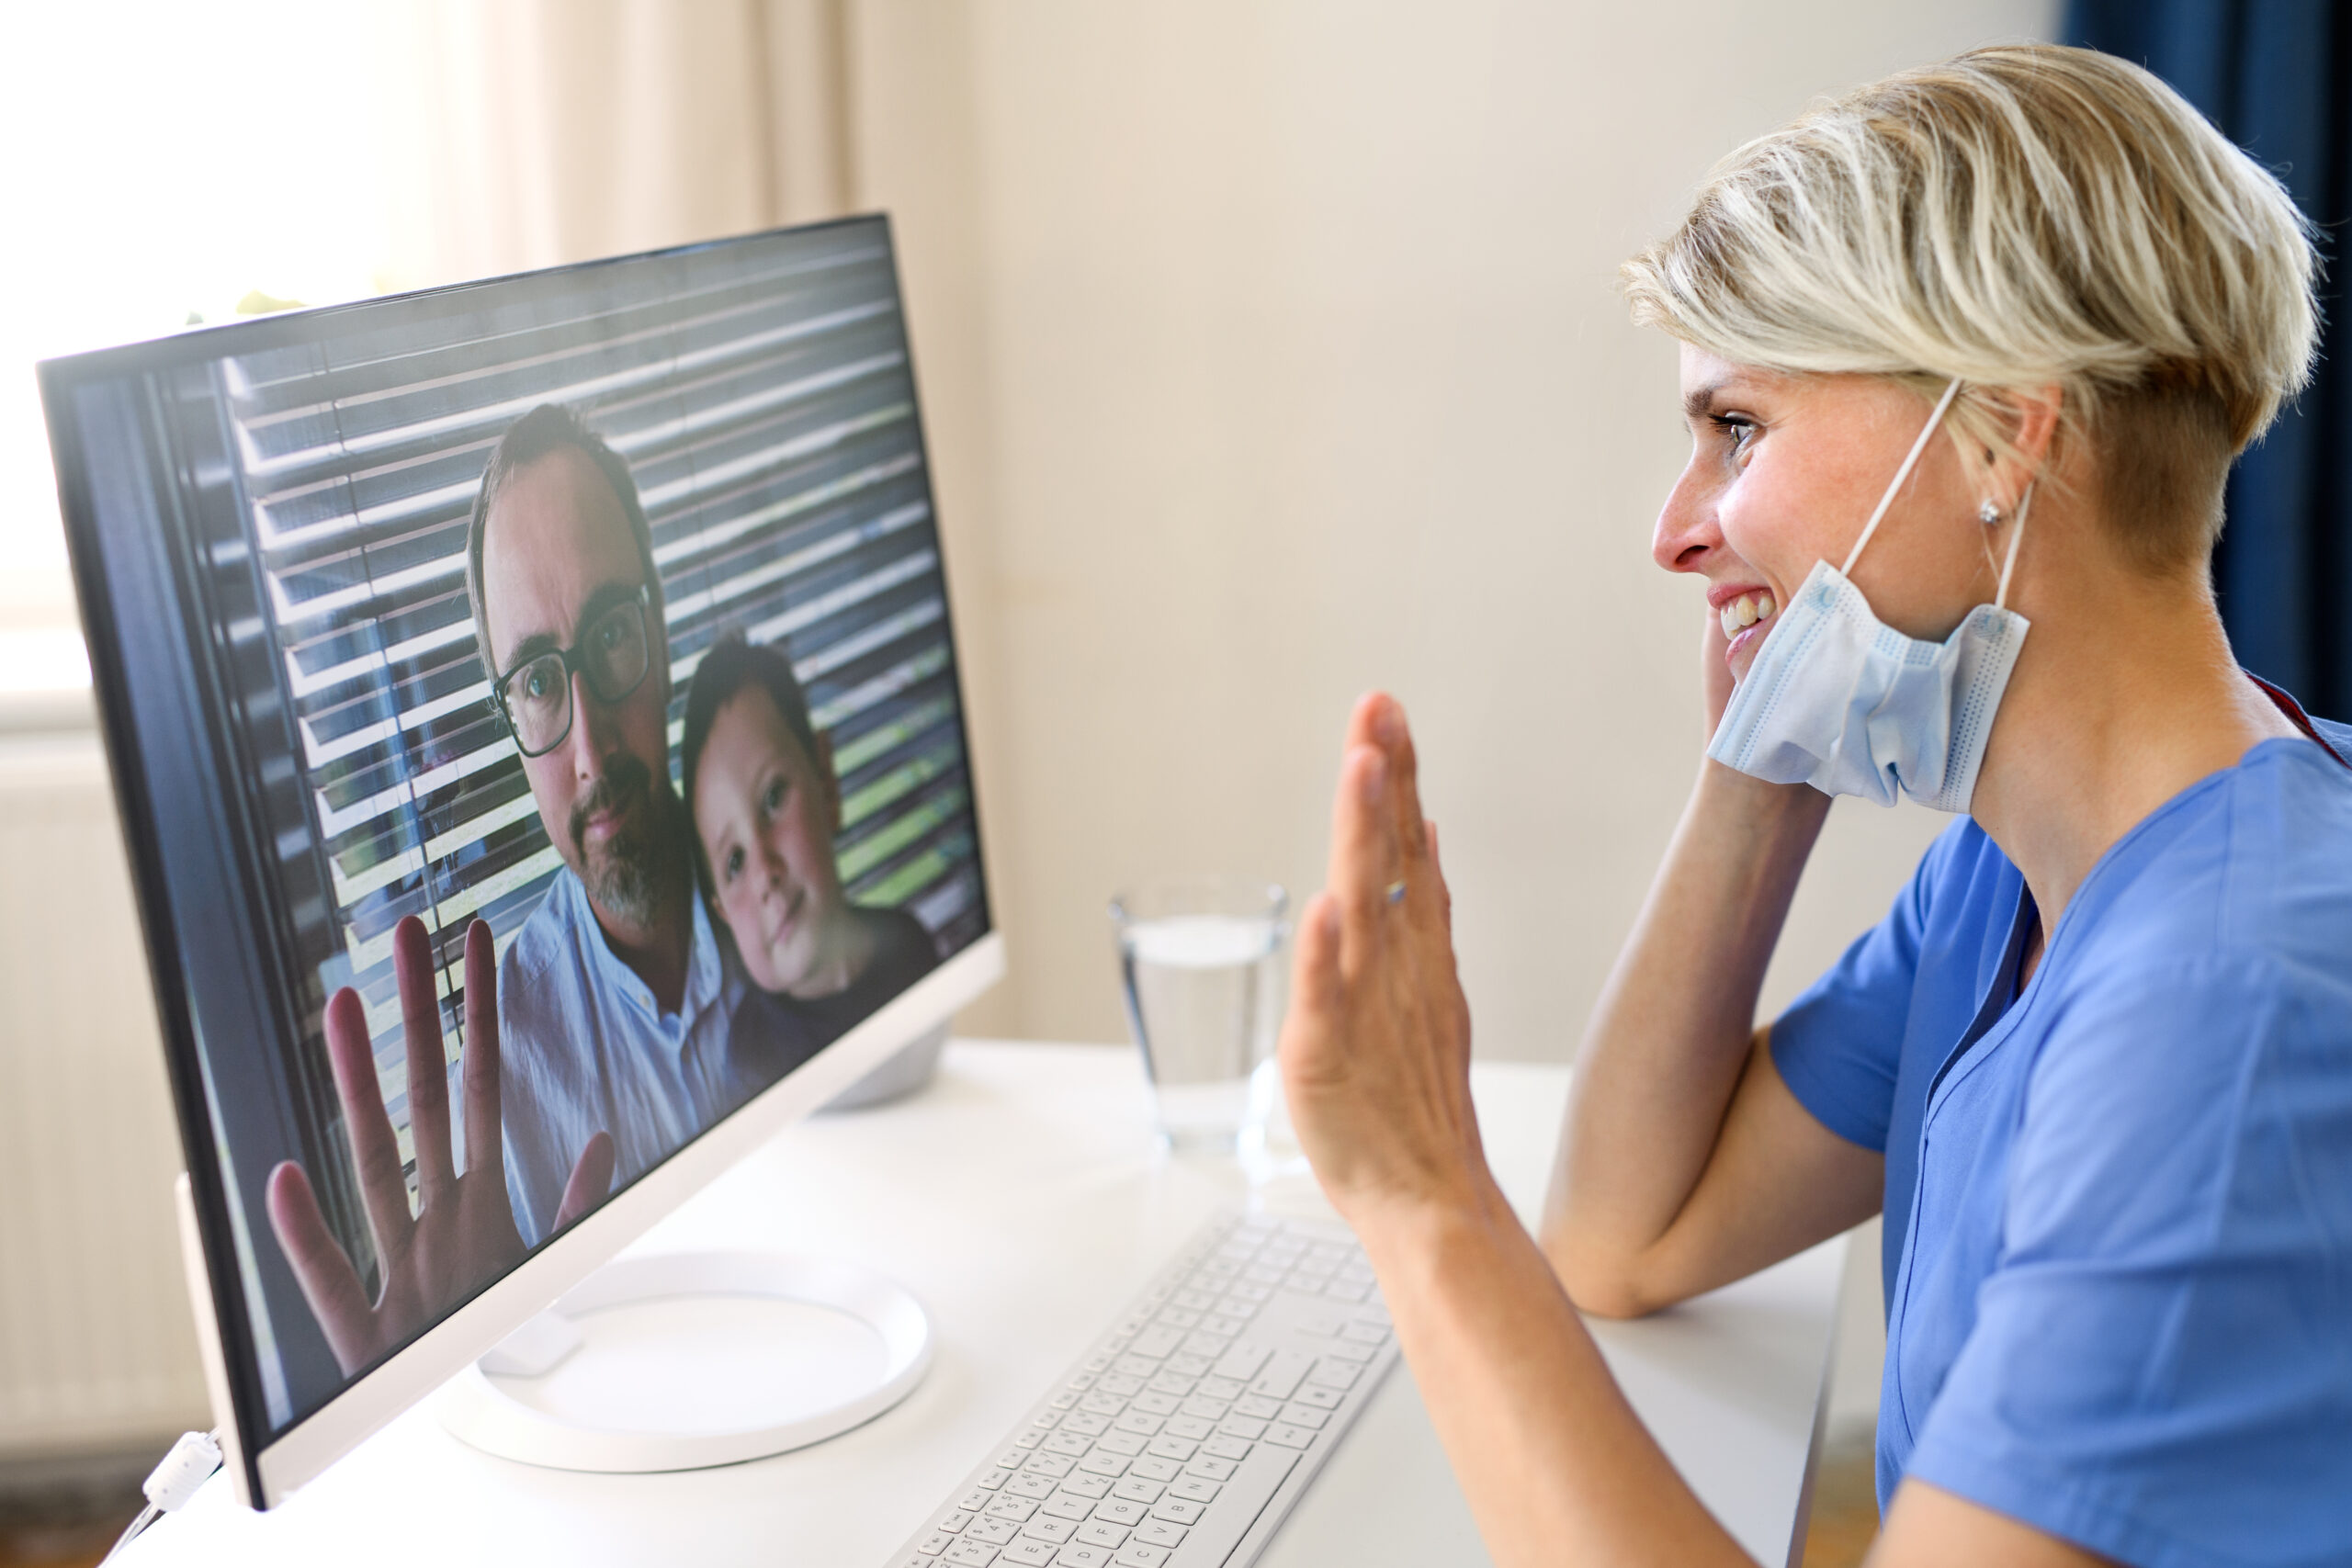 female medical professional speaking with man and boy over video conference